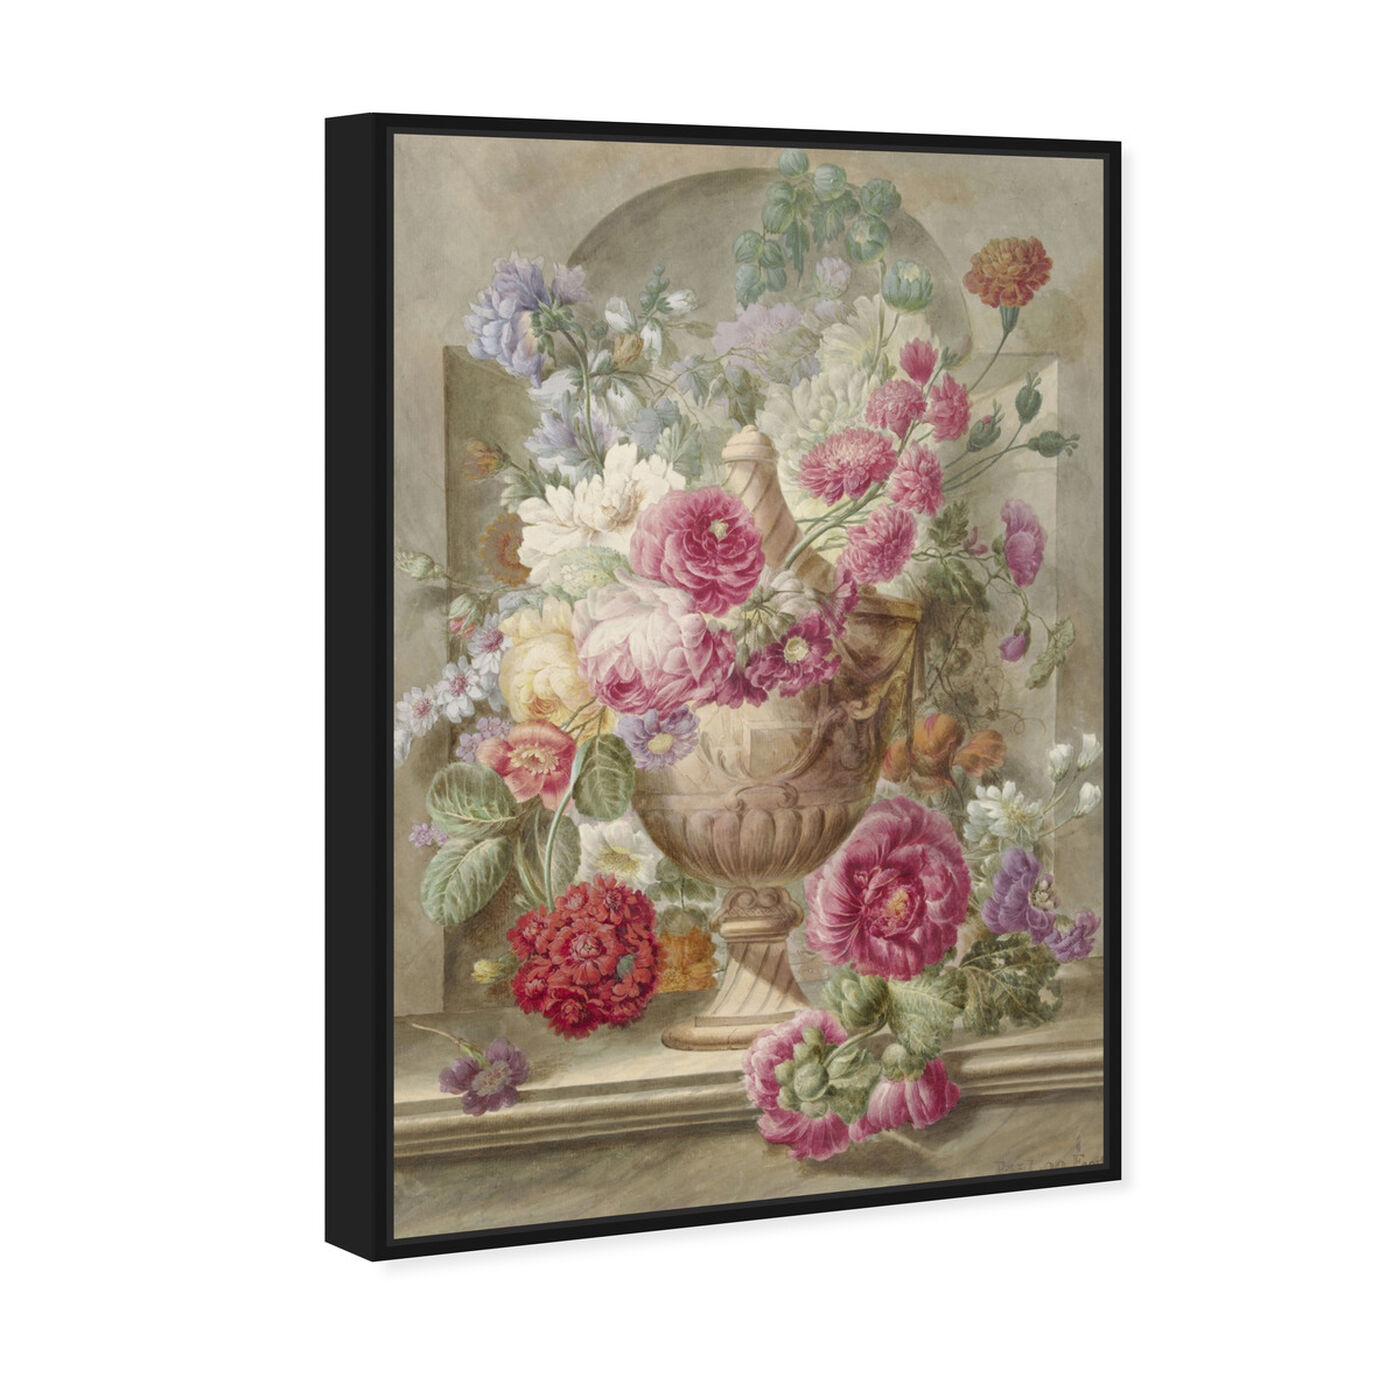 Angled view of Flower Arrangement XII - The Art Cabinet featuring floral and botanical and florals art.